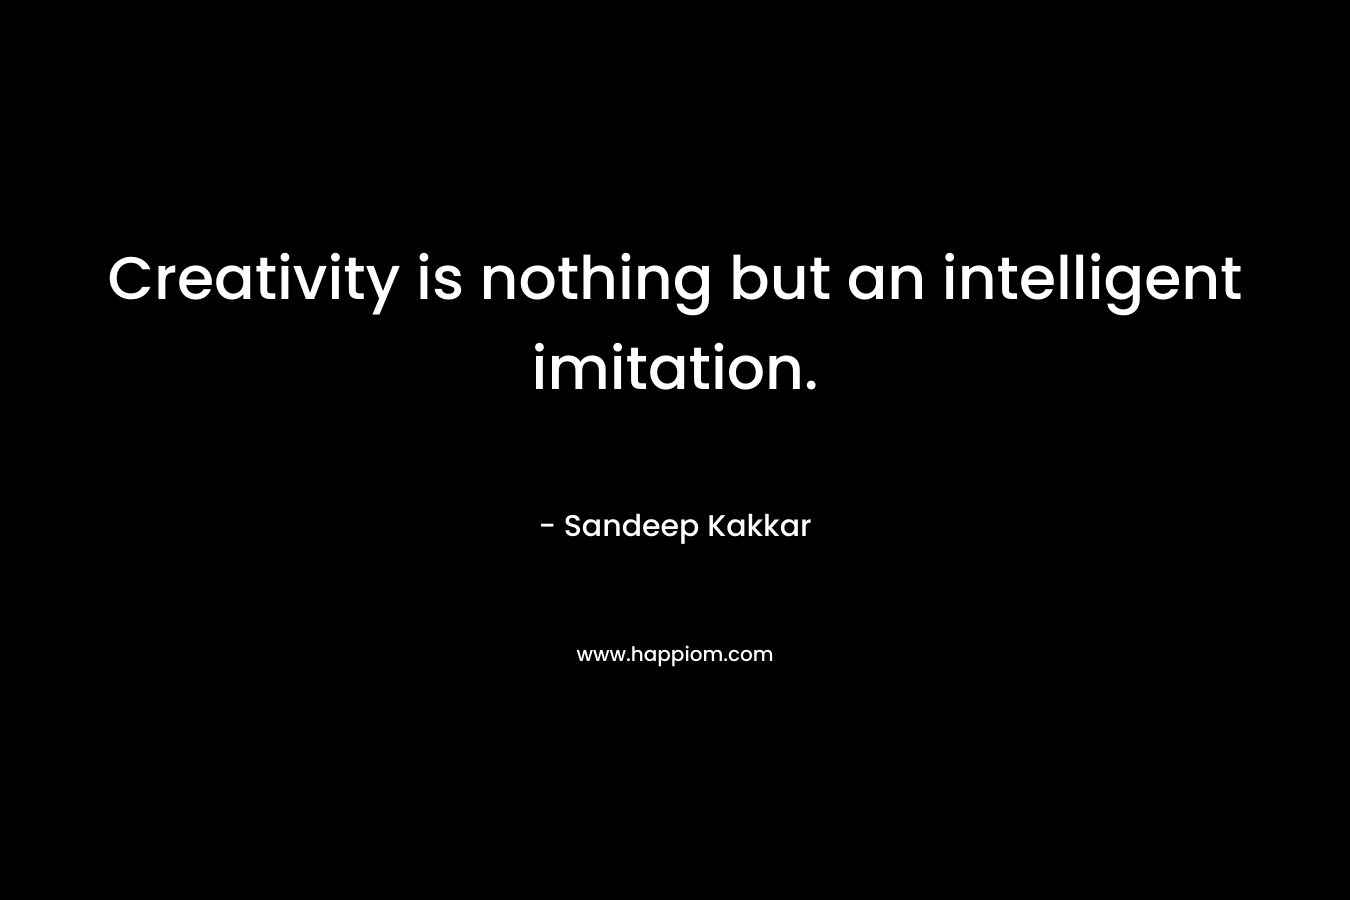 Creativity is nothing but an intelligent imitation.